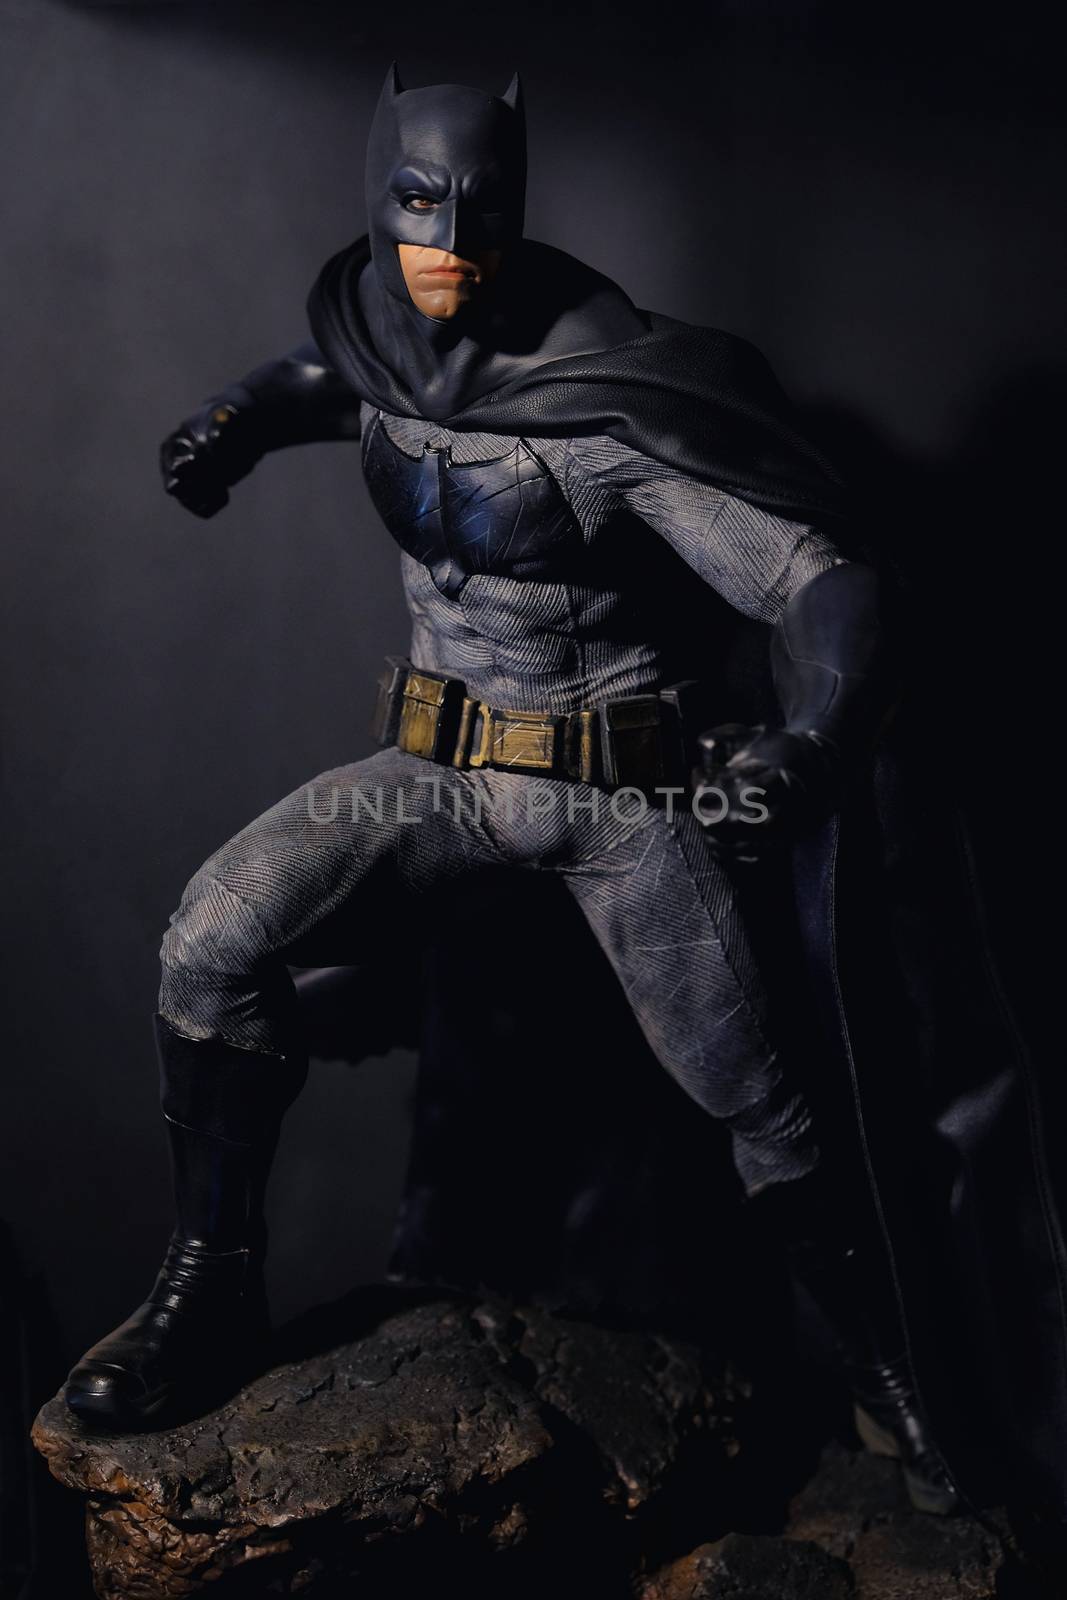 Khonkaen,Thailand - March 4th 2017: Batman figure standing gracefully on black background. Batman is a popular line of construction toys manufactured by the slideshow Group.